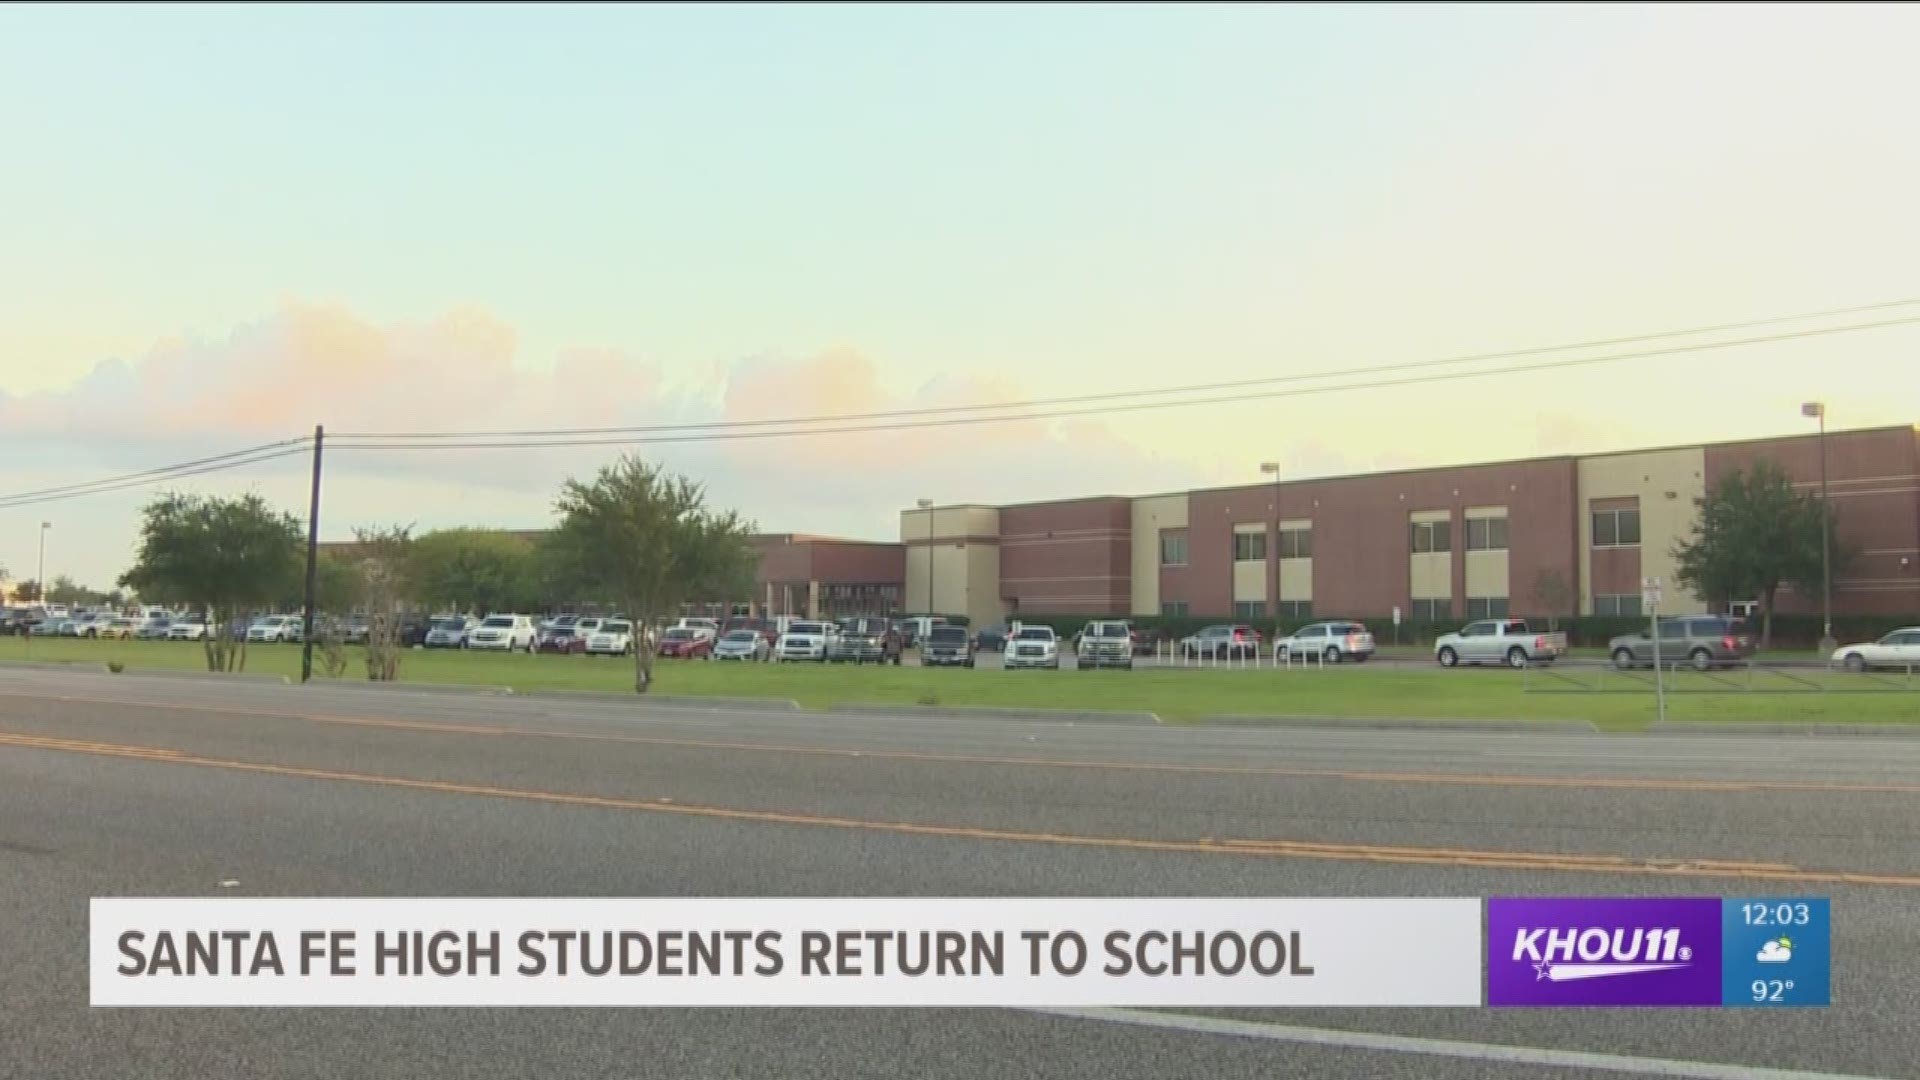 Santa Fe High School students went back to school Monday for the start of the 218-2019 school year. A lot of changes have been made since the deadly shooting rampage that left 10 dead back in May. 